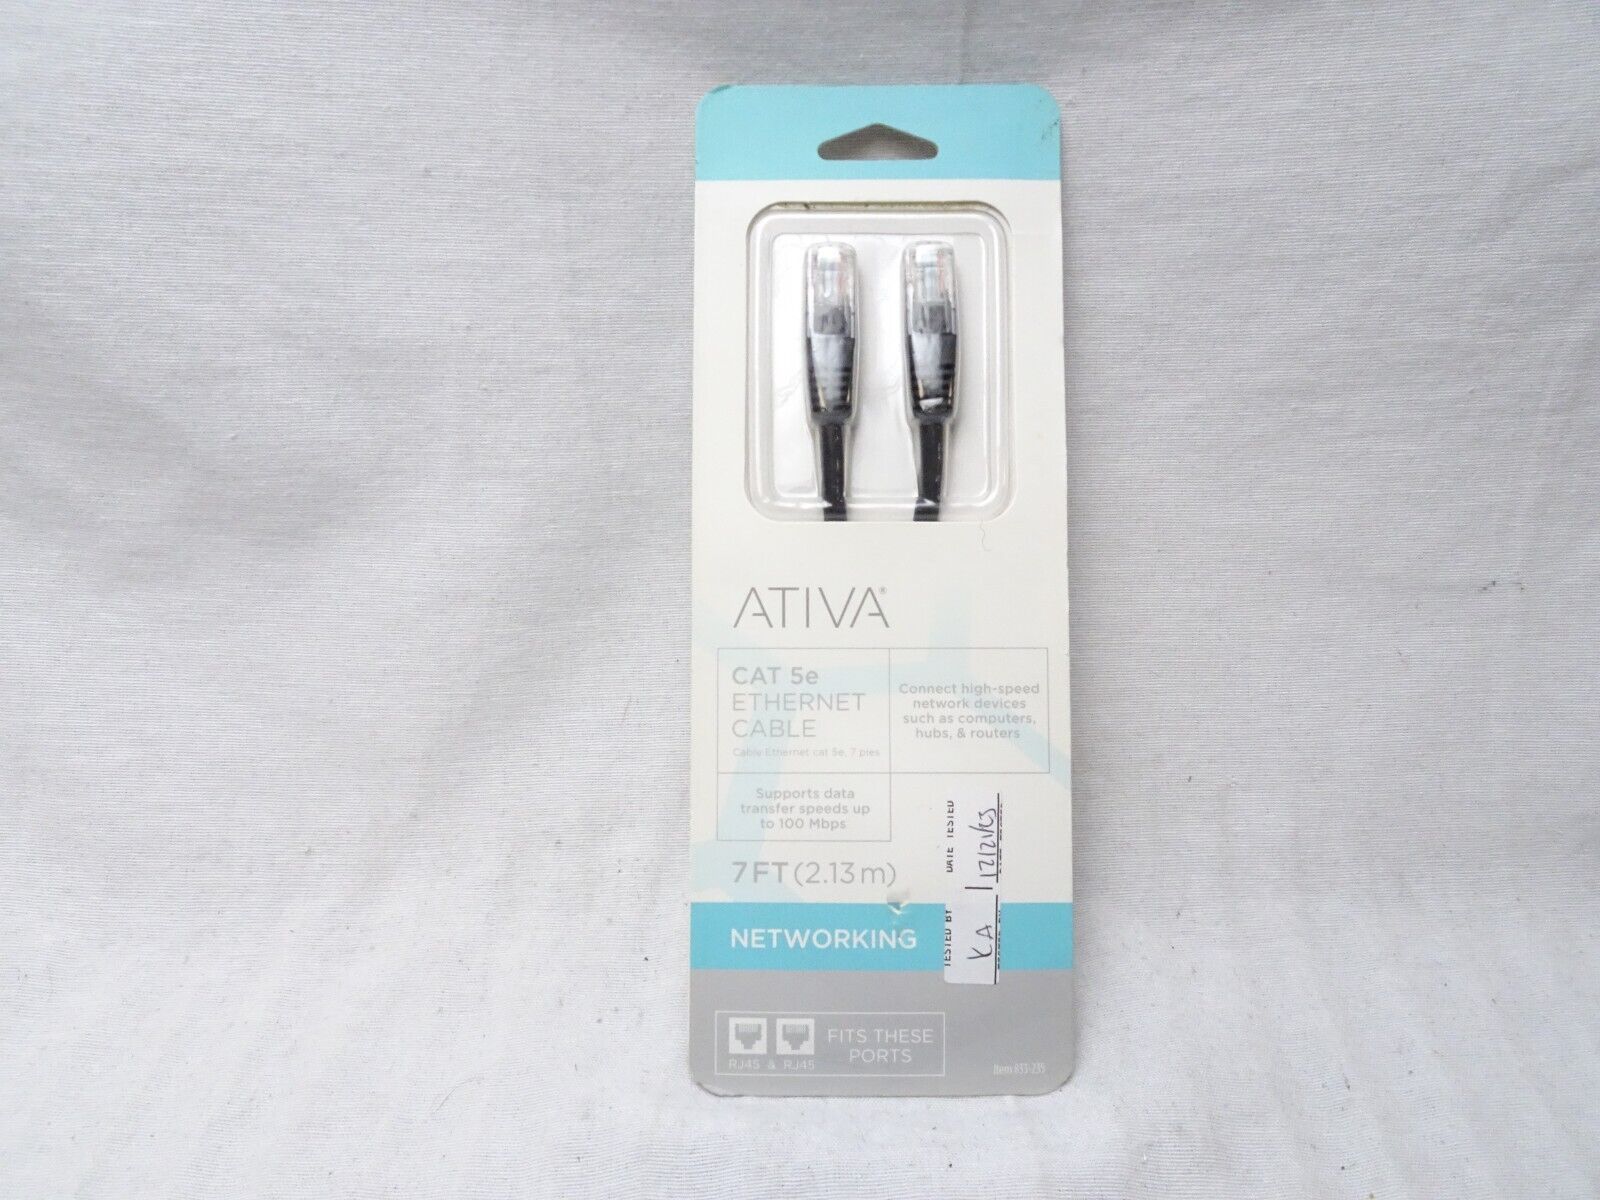 Ativa CAT 5e Ethernet Cable 7FT